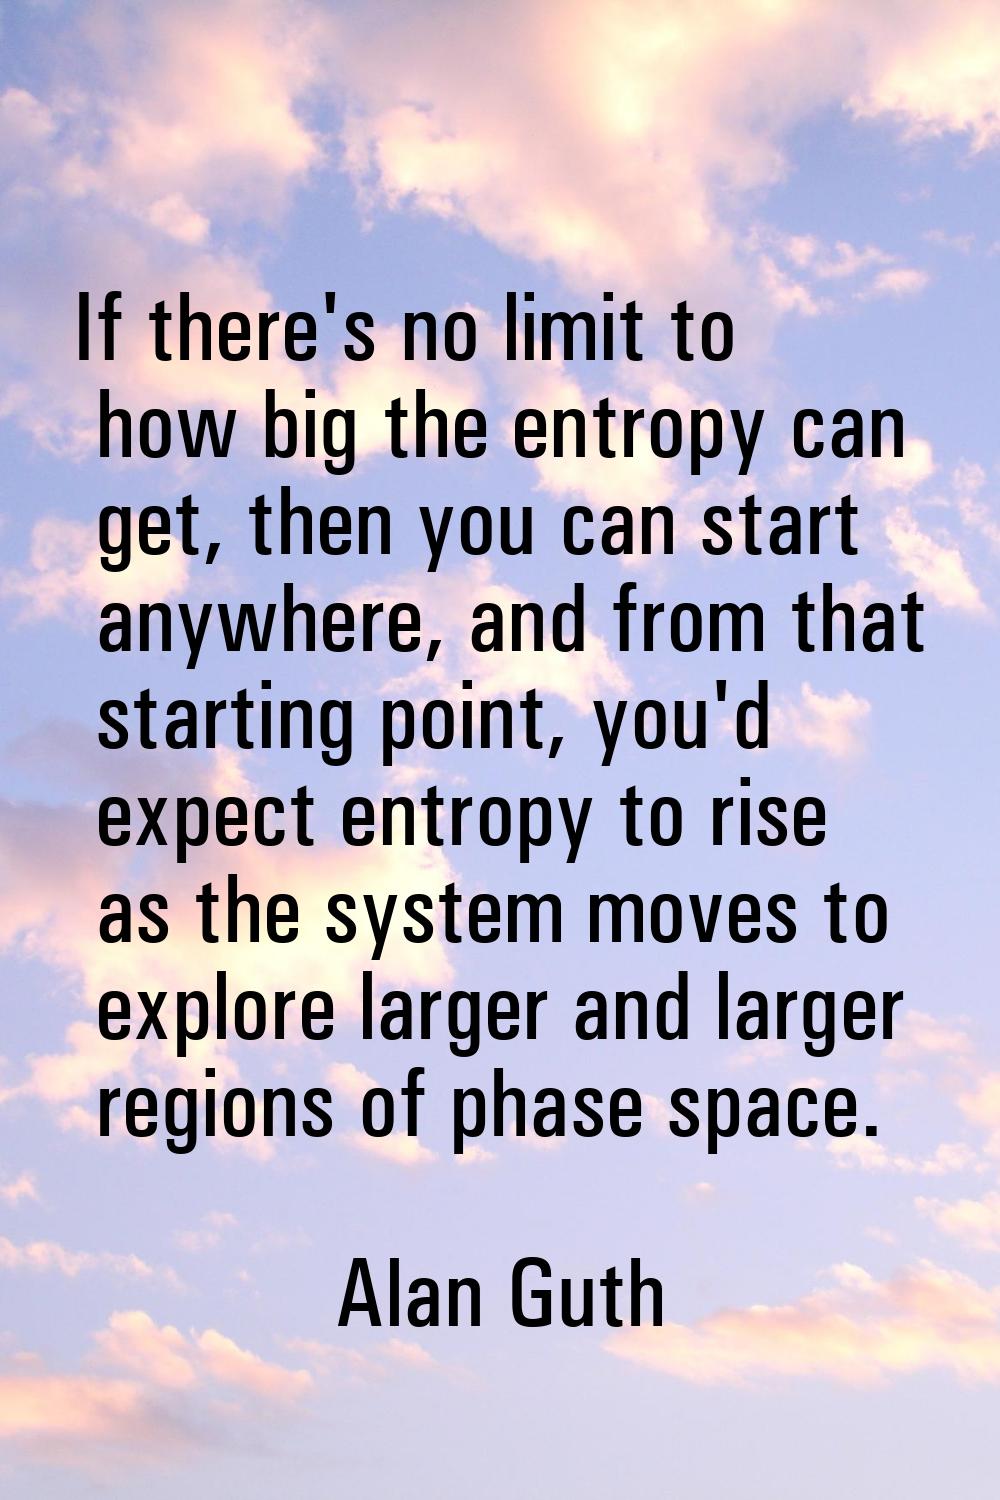 If there's no limit to how big the entropy can get, then you can start anywhere, and from that star